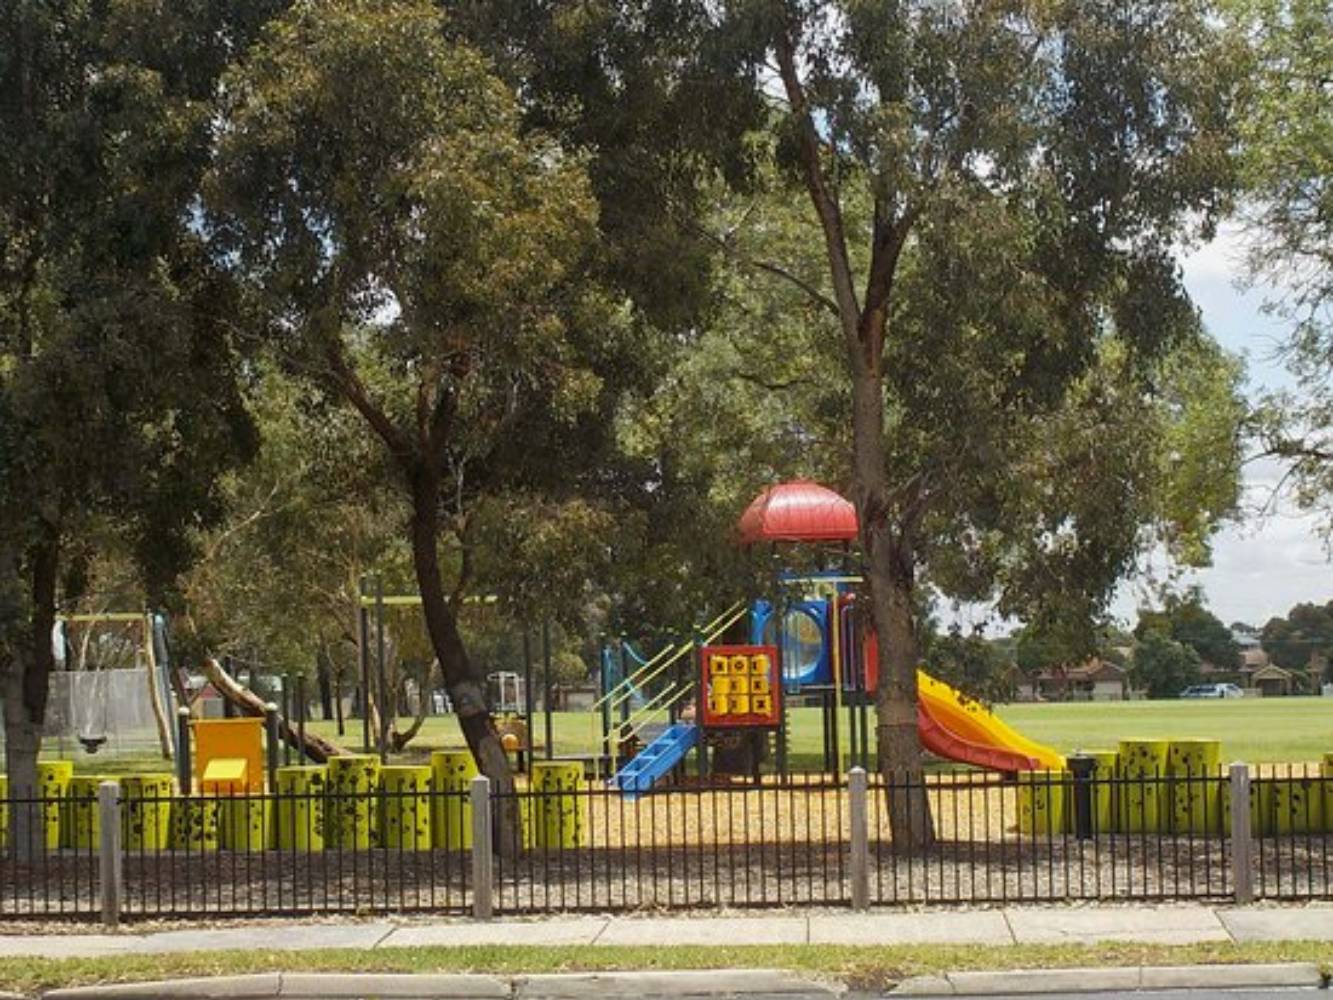 Local playground and reserve